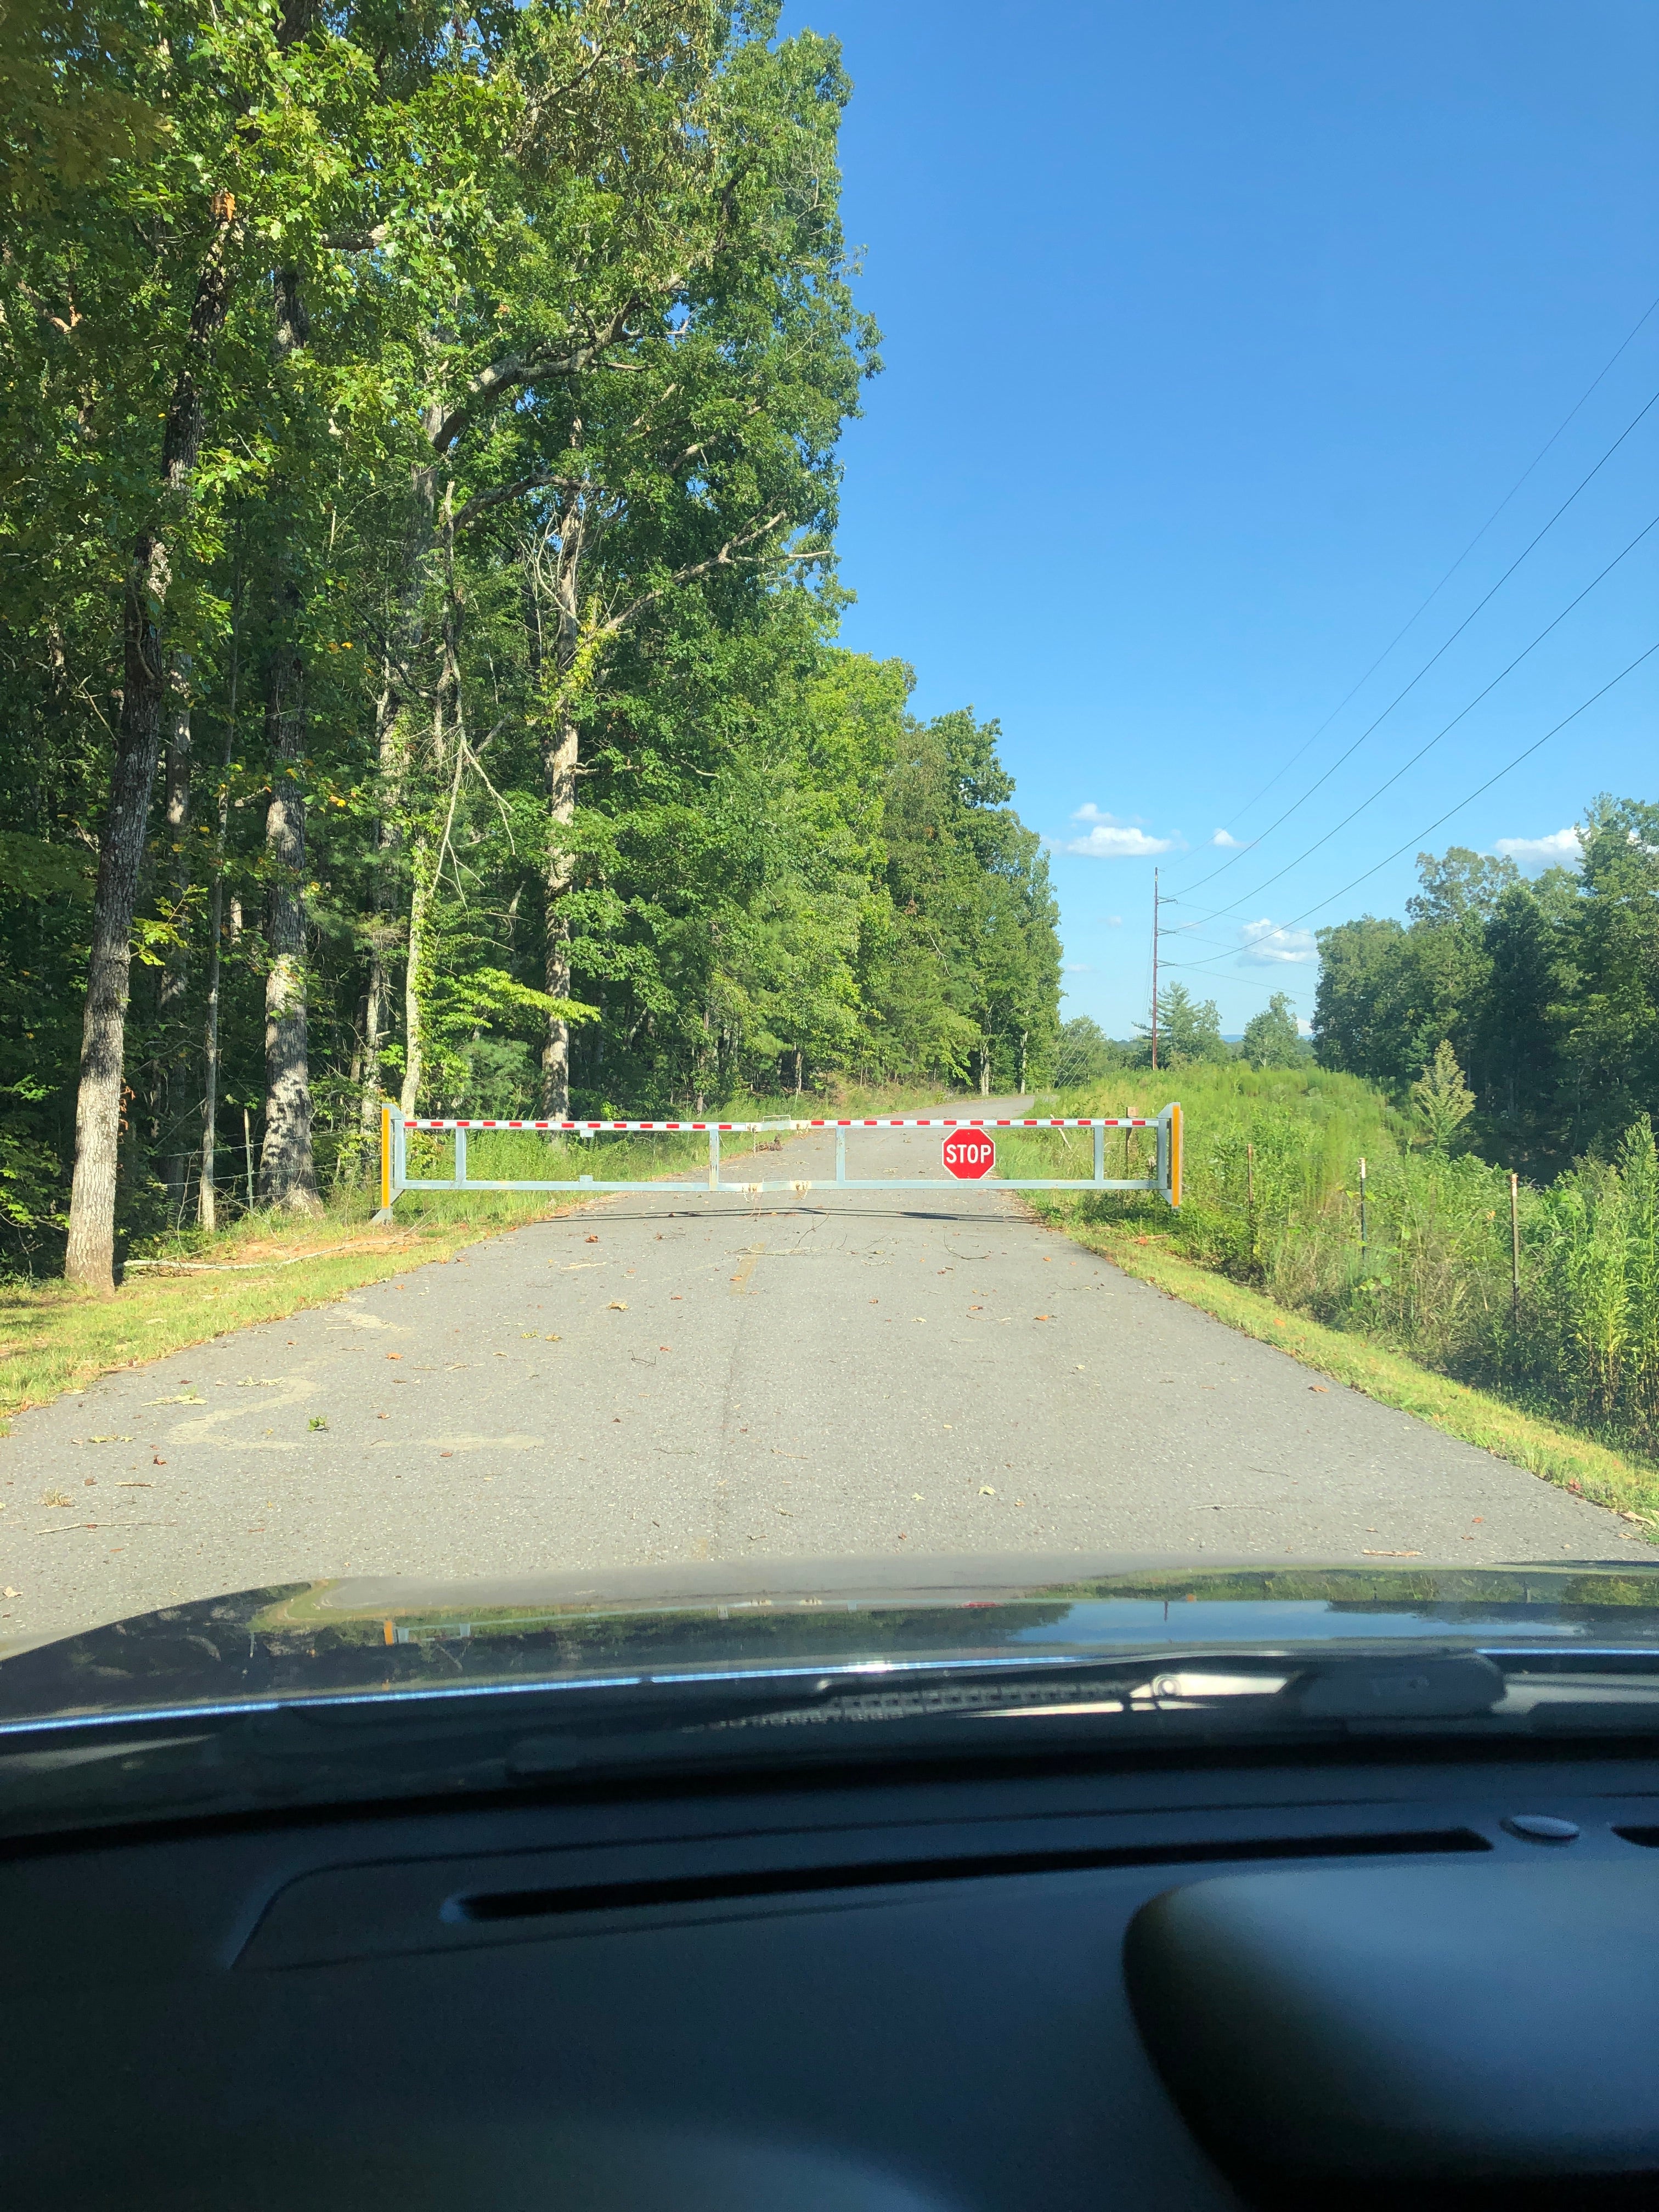 The camping area road access is closed at the time of this writing 08/15/2019.